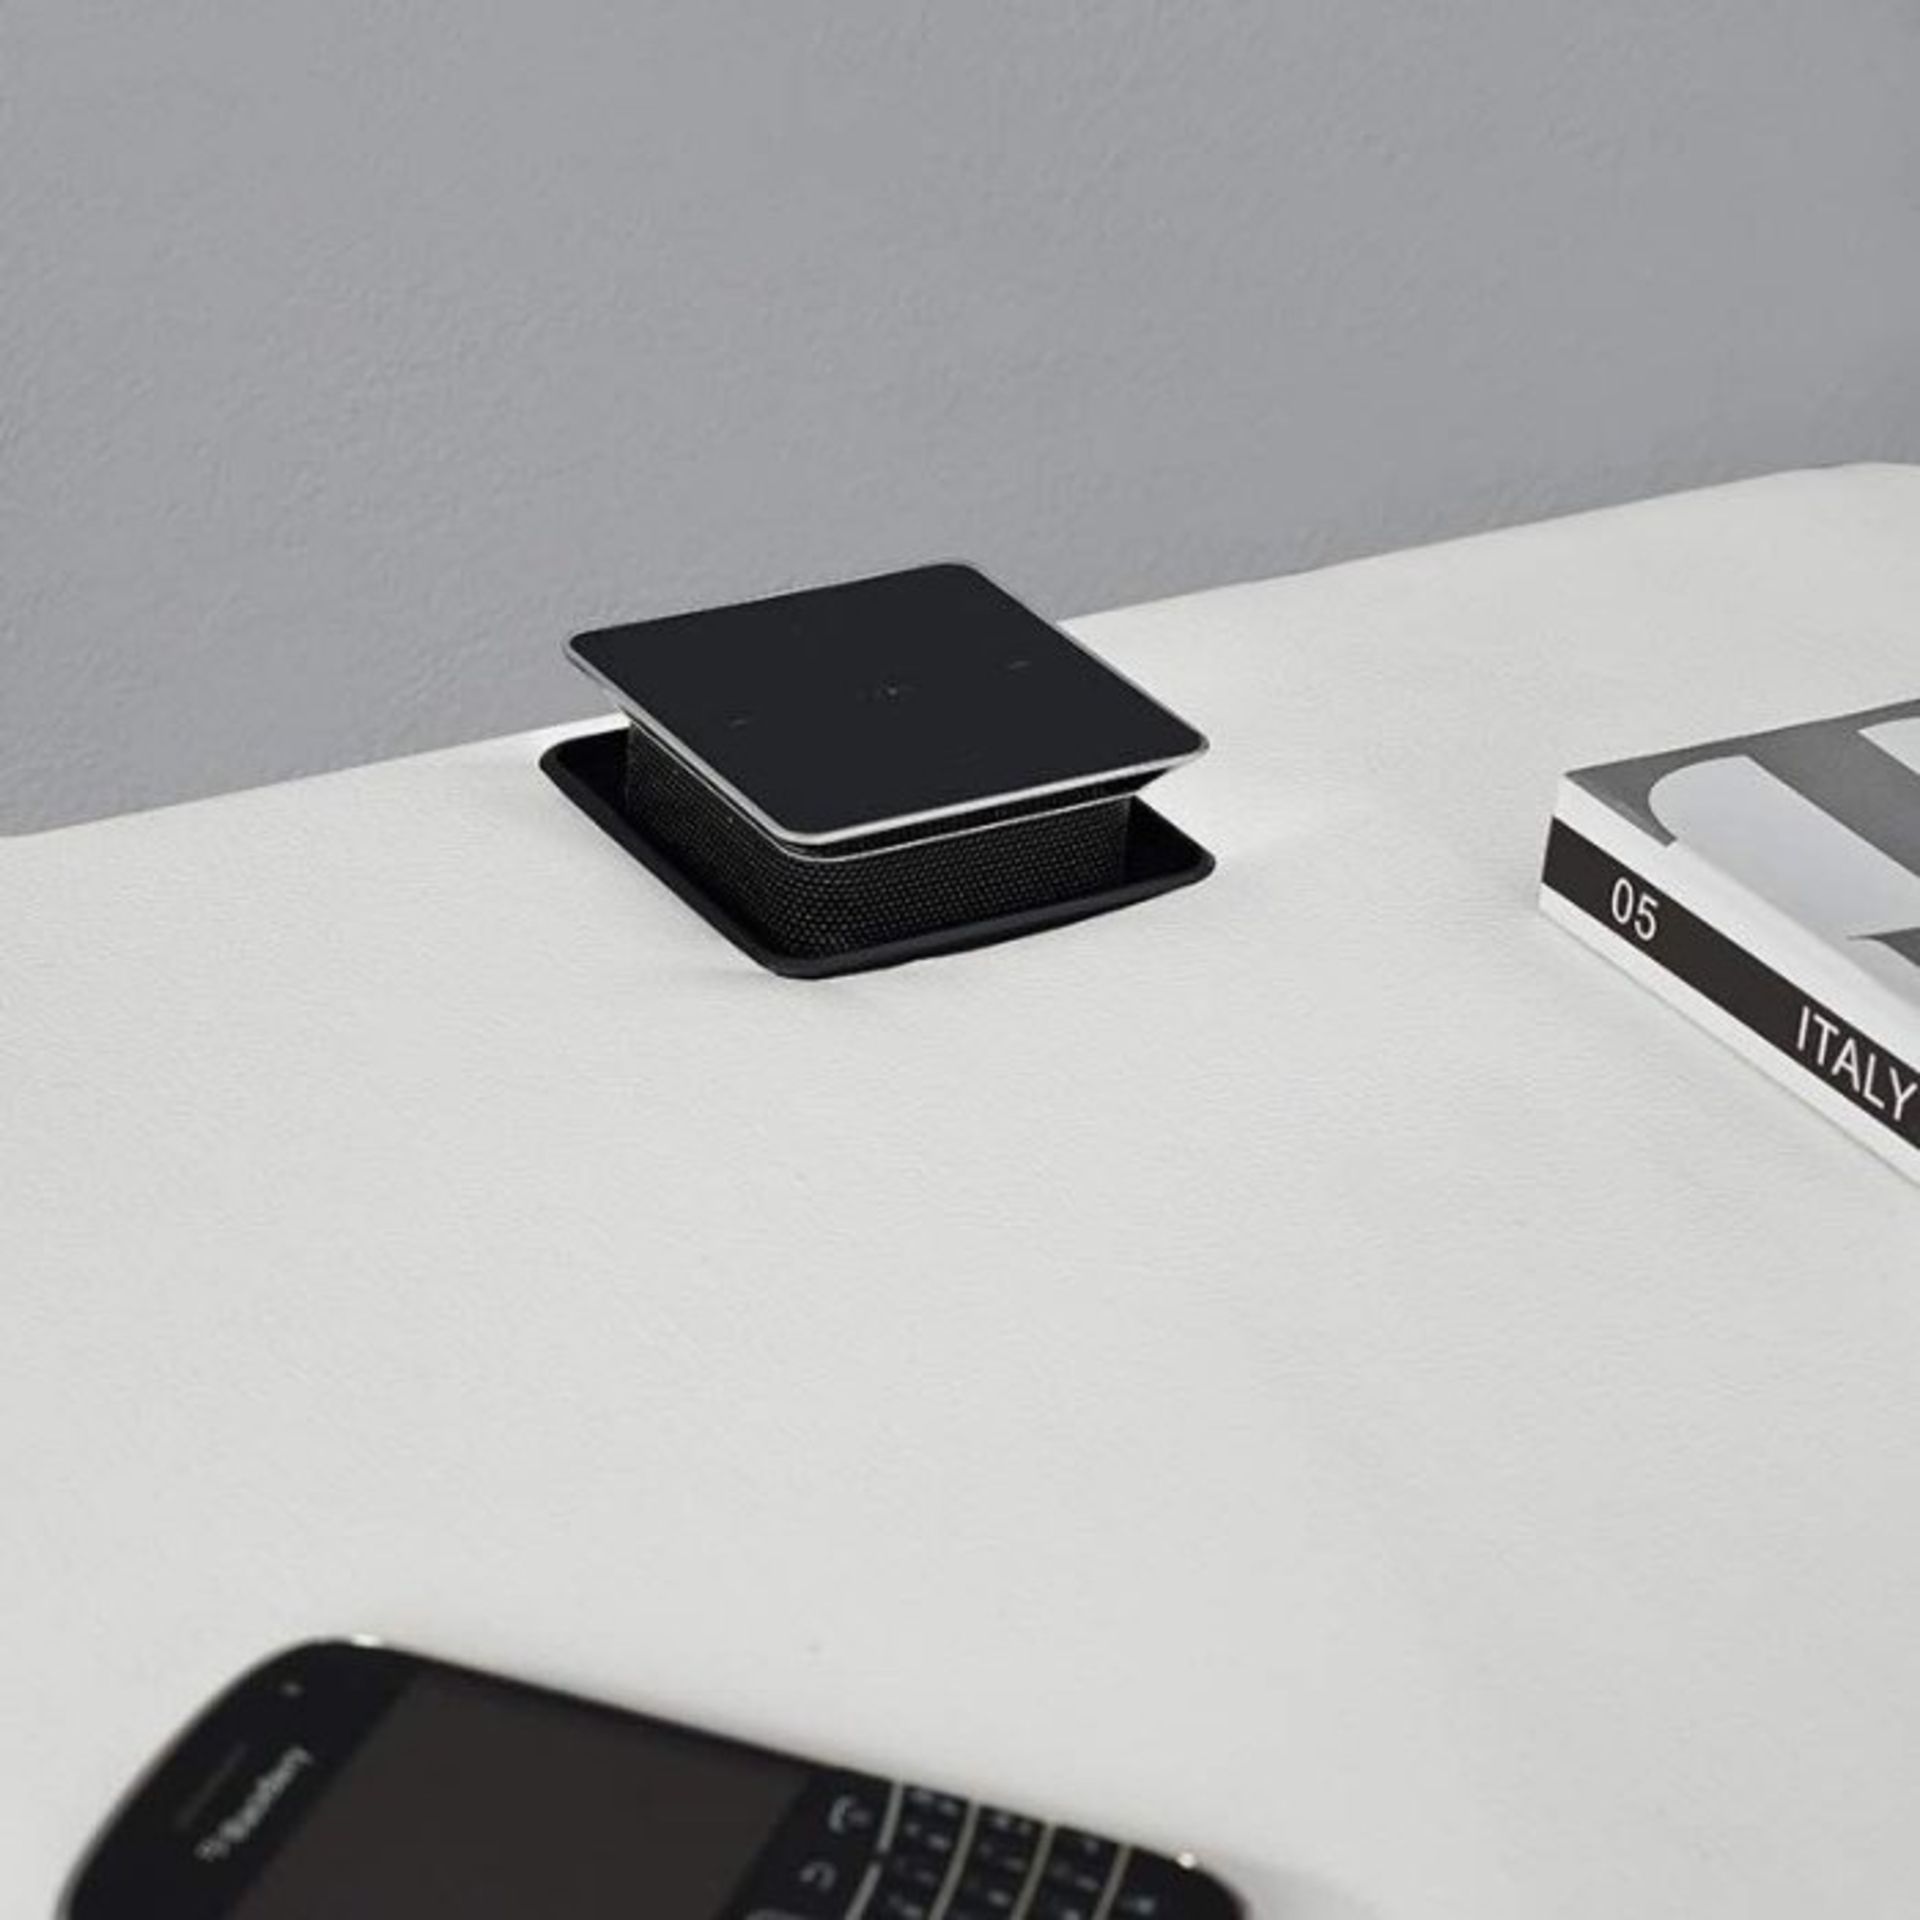 WHITE LEATHER BEDSIDE WITH BUILT IN BLUETOOTH LED SPEAKER - Image 6 of 7